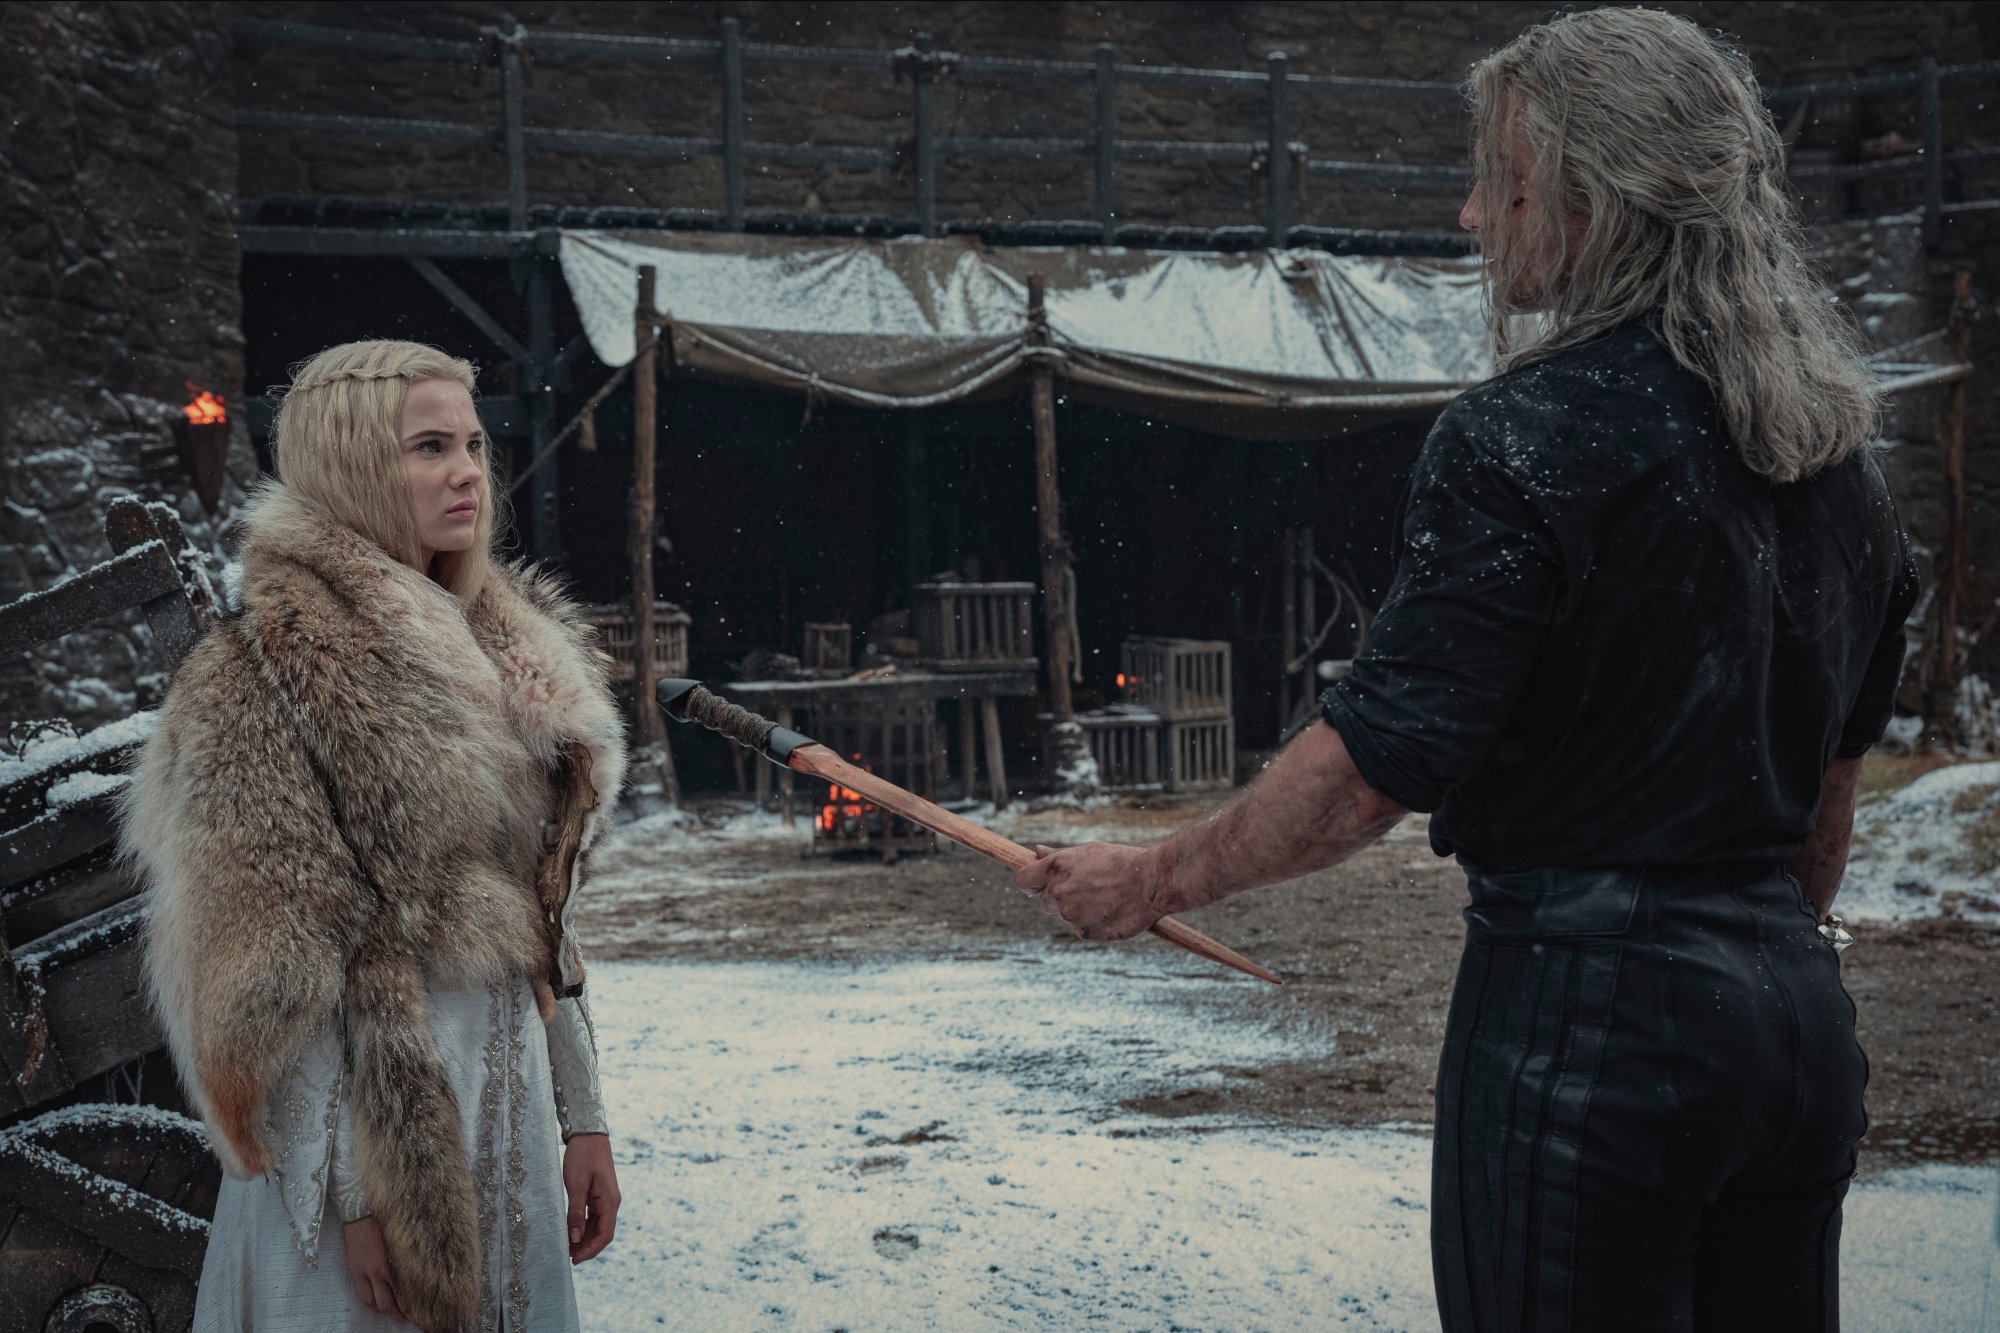 Freya Allen and Henry Cavill as Princess Cirilla and Geralt of Rivia in 'The Witcher' Season 2. He's holding out a blade to her.